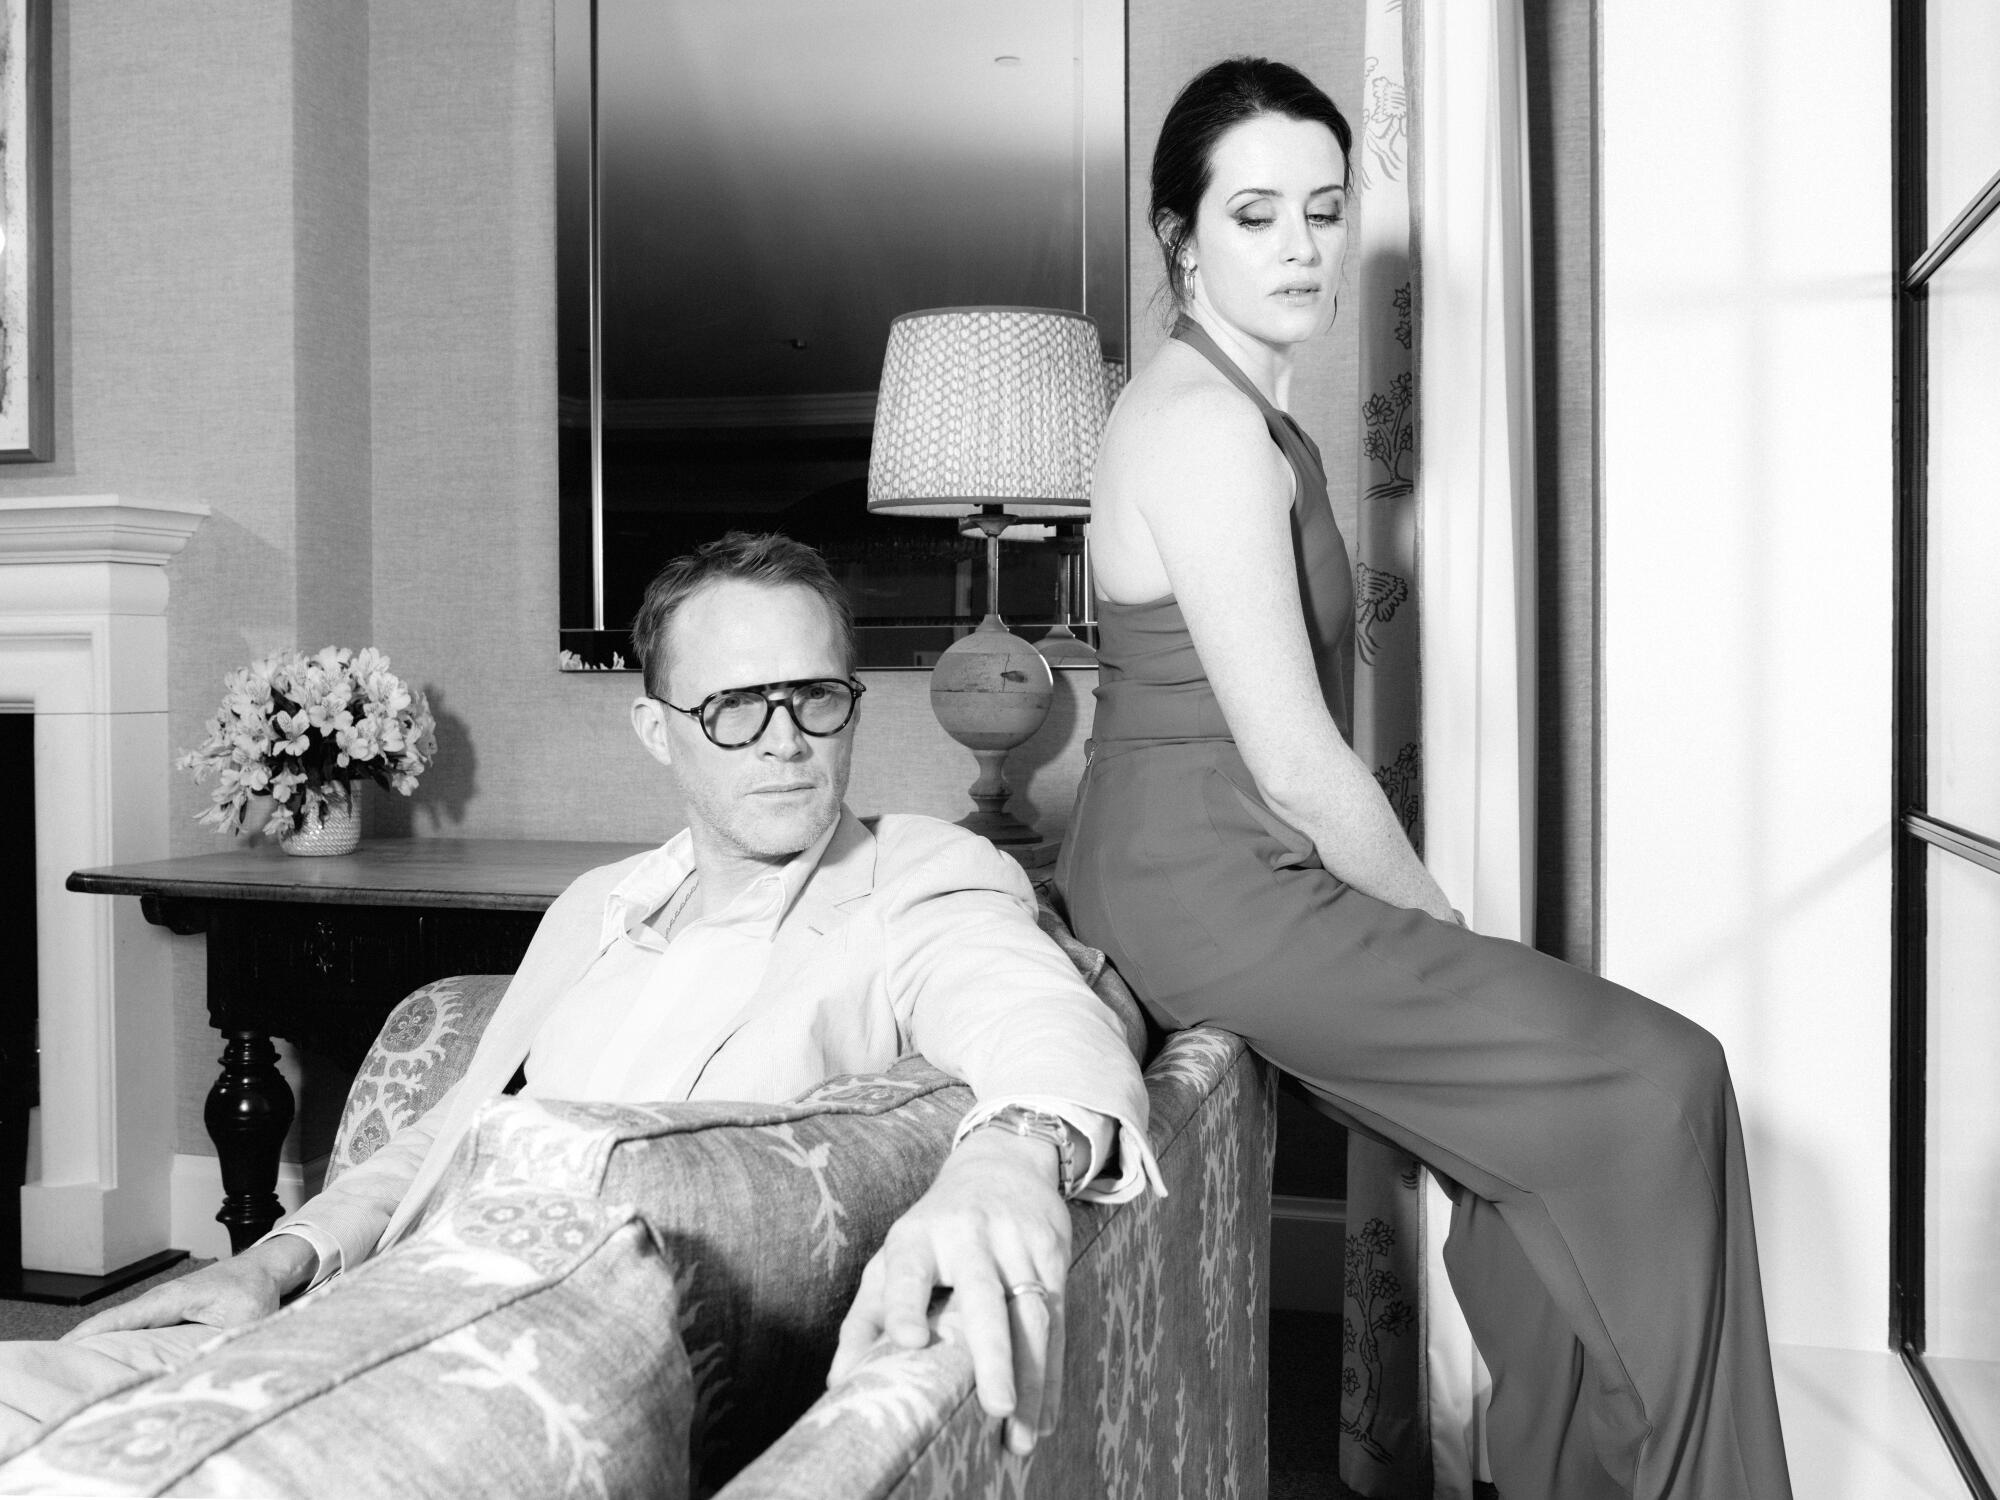 Paul Bettany and Claire Foy photographed at Crosby Street Hotel. 